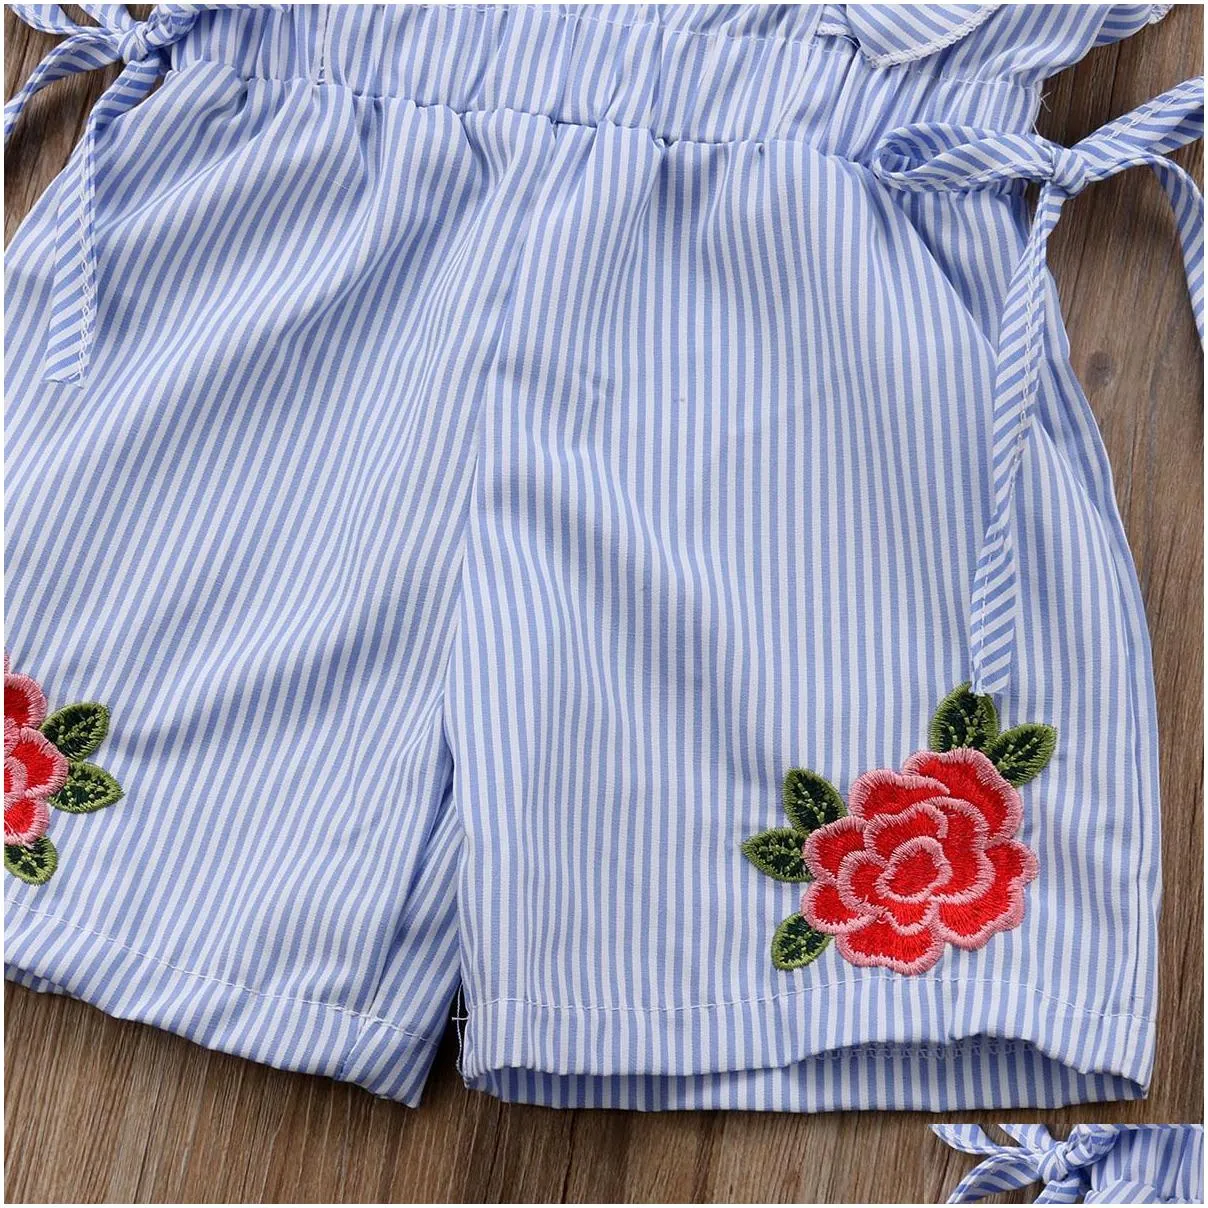 Rompers Toddler Kids Baby Girl Flower Stripe Ruffle Romper Jumpsuit Outfits Clothes 230525 Drop Delivery Dhfc9